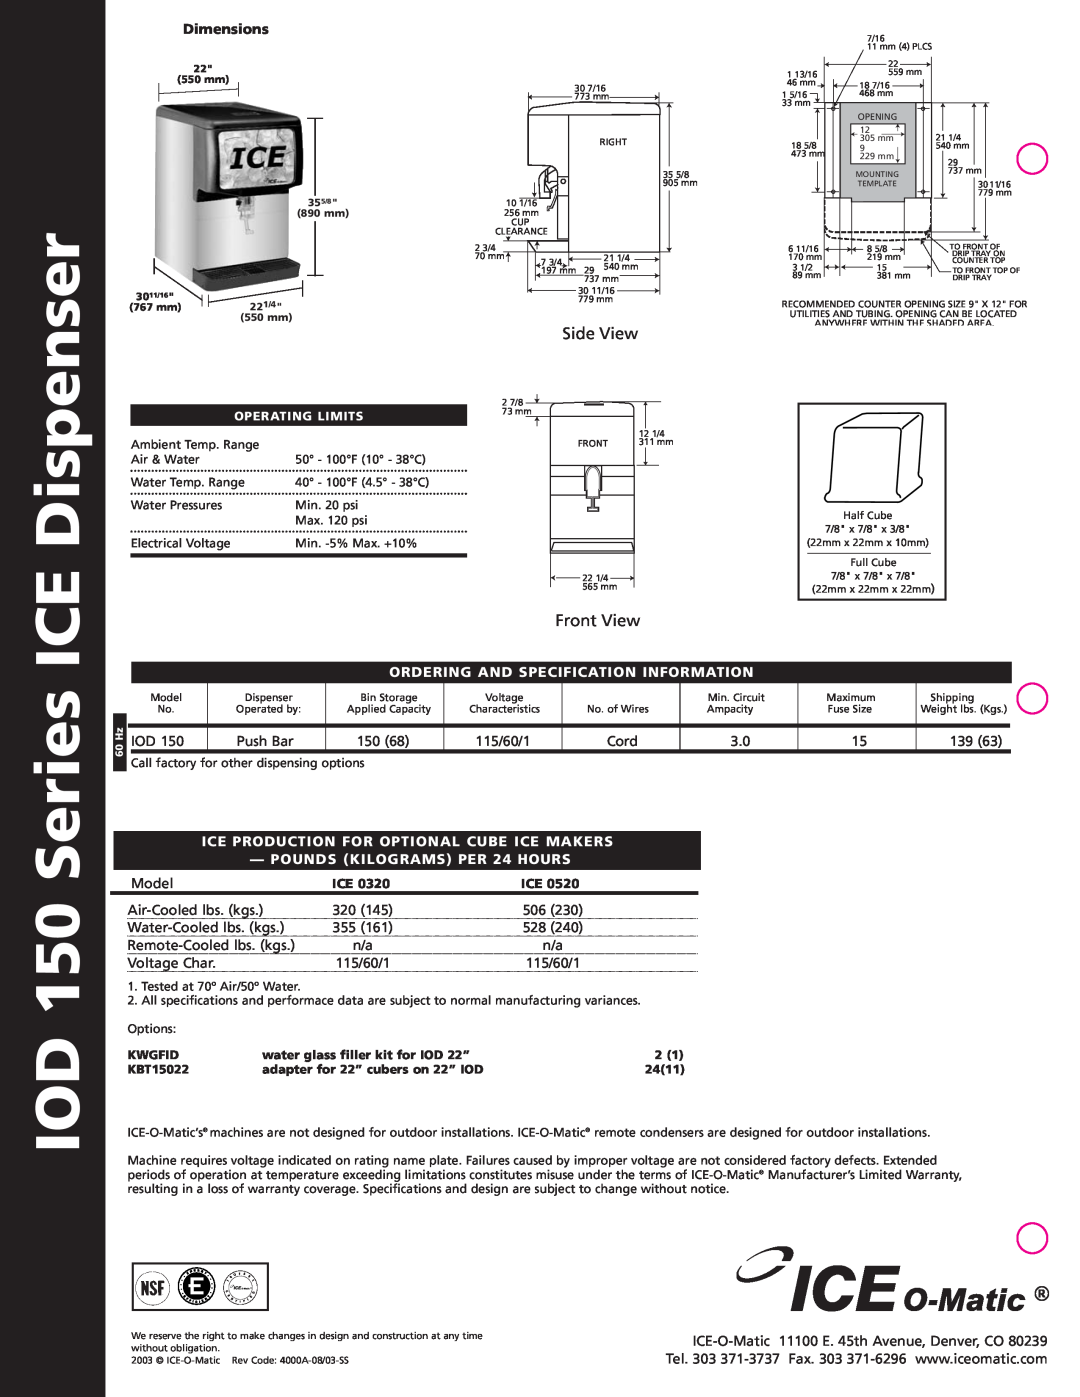 Ice-O-Matic Dispenser, IOD 150 Series ICE, Side View, Front View, Dimensions, Ordering And Specification Information 